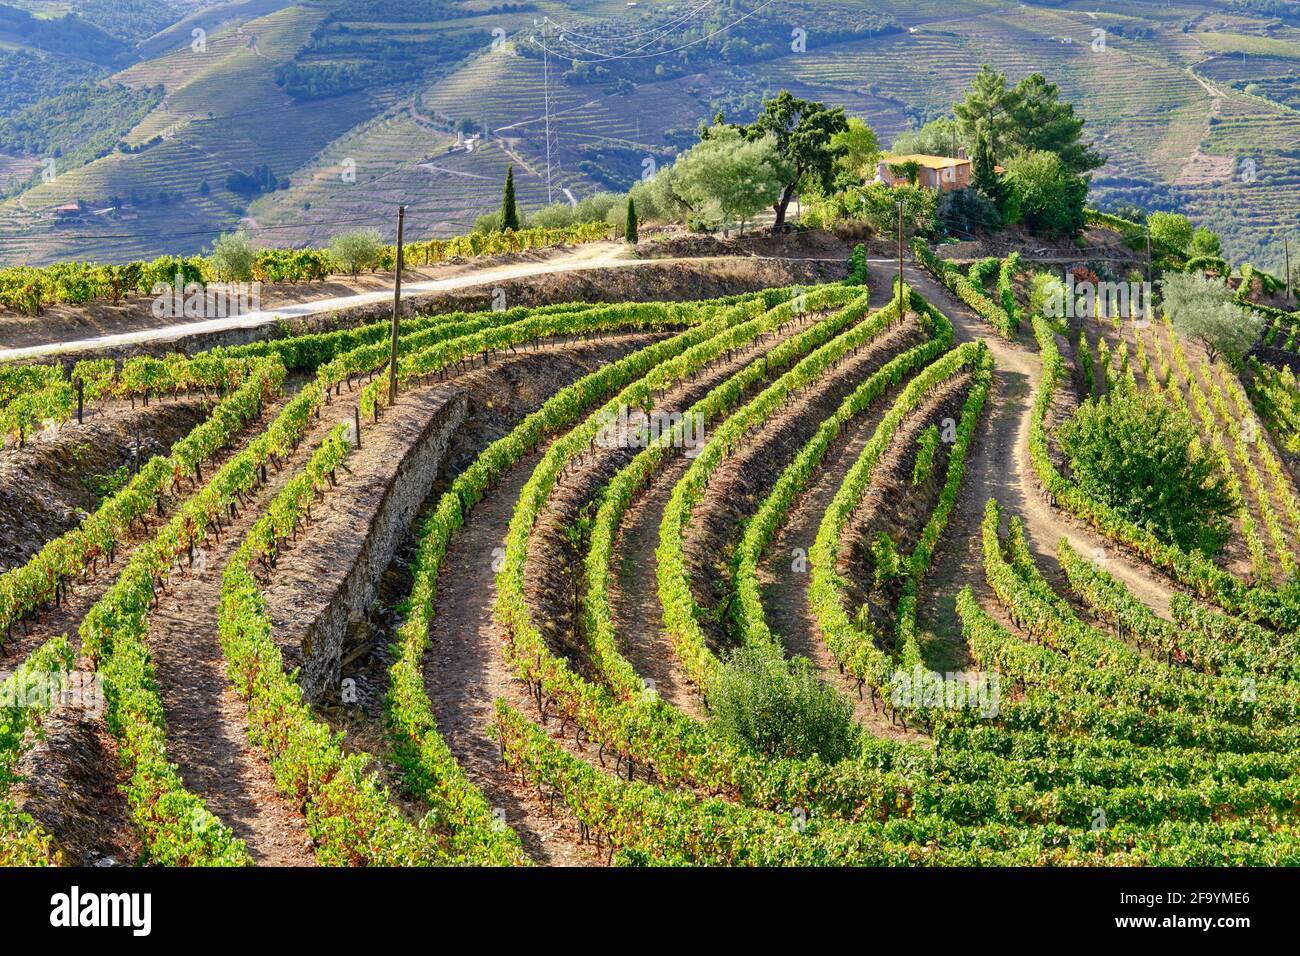 Vale de Mendiz, a valley spreading along the road from Alijo to Pinhao, is full of vineyards to produce the world famous Port wine and the Douro wine. Stock Photo